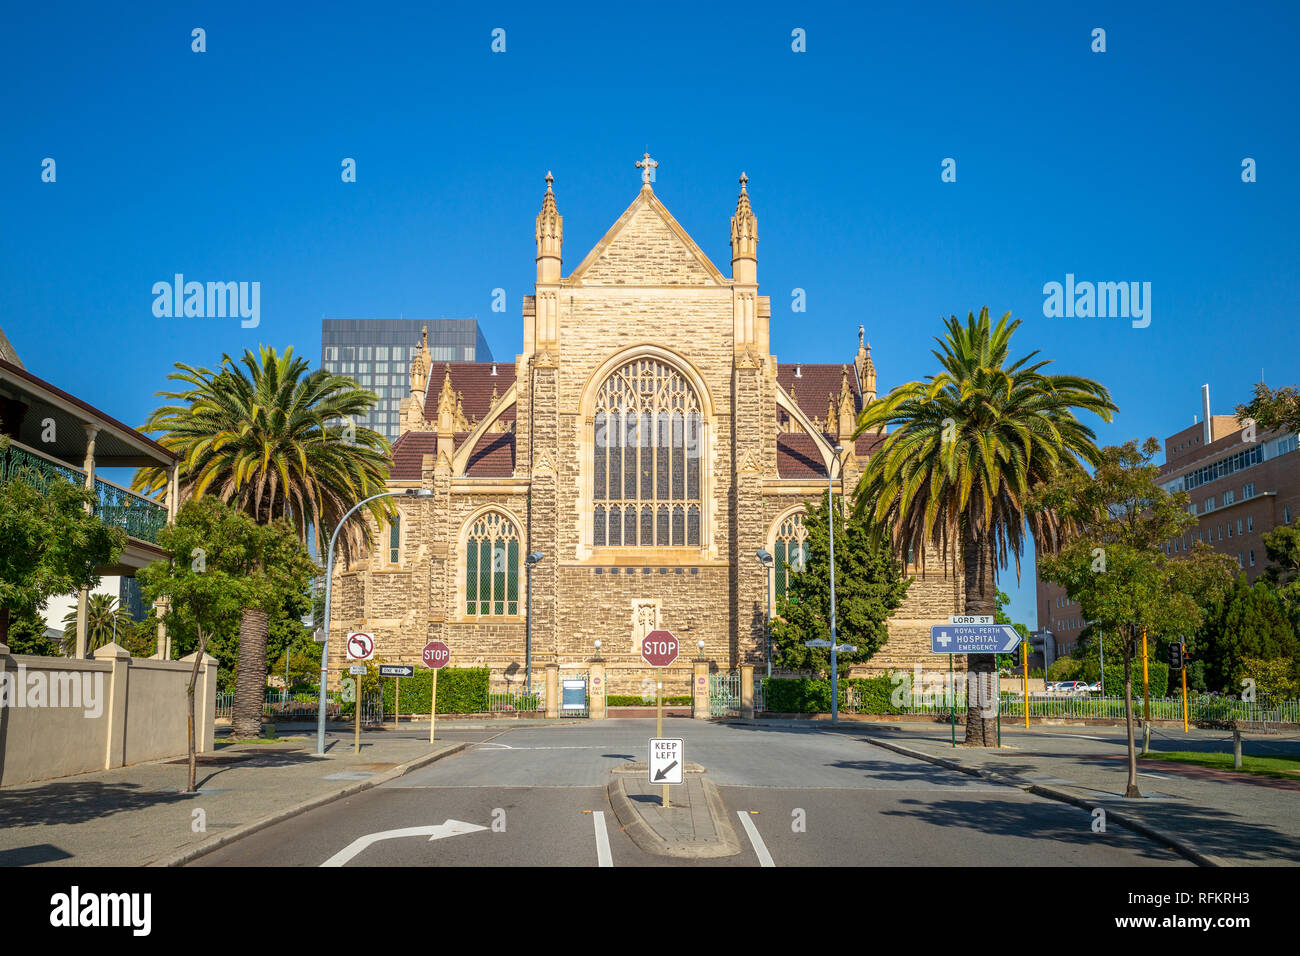 St Marys Cathedral in Perth, Western Australia Stockfoto